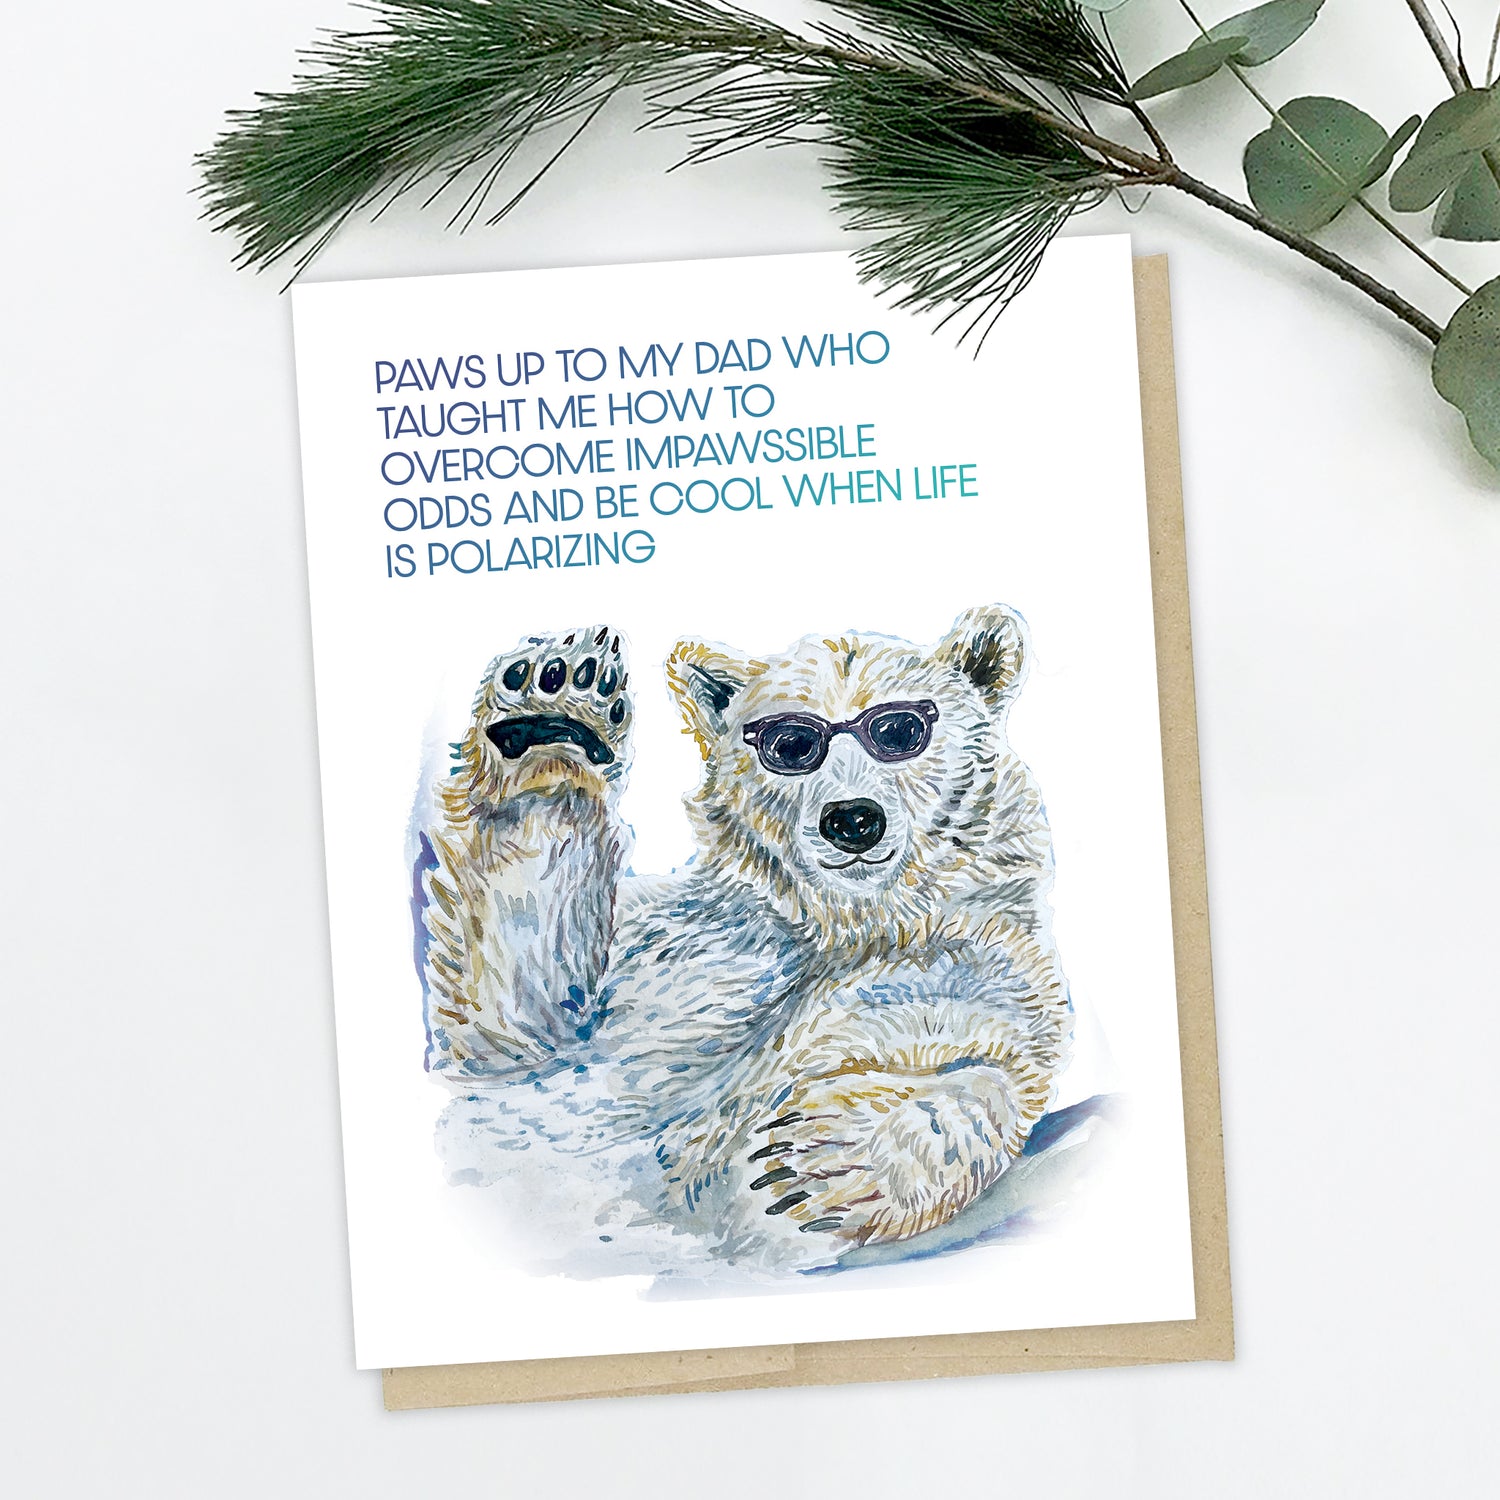 A greeting card for dad with a hand painted polar bear in sunglasses, it says "Paws up to my dad who taught me how to overcome impawssible odds and be cool when life is polarizing"